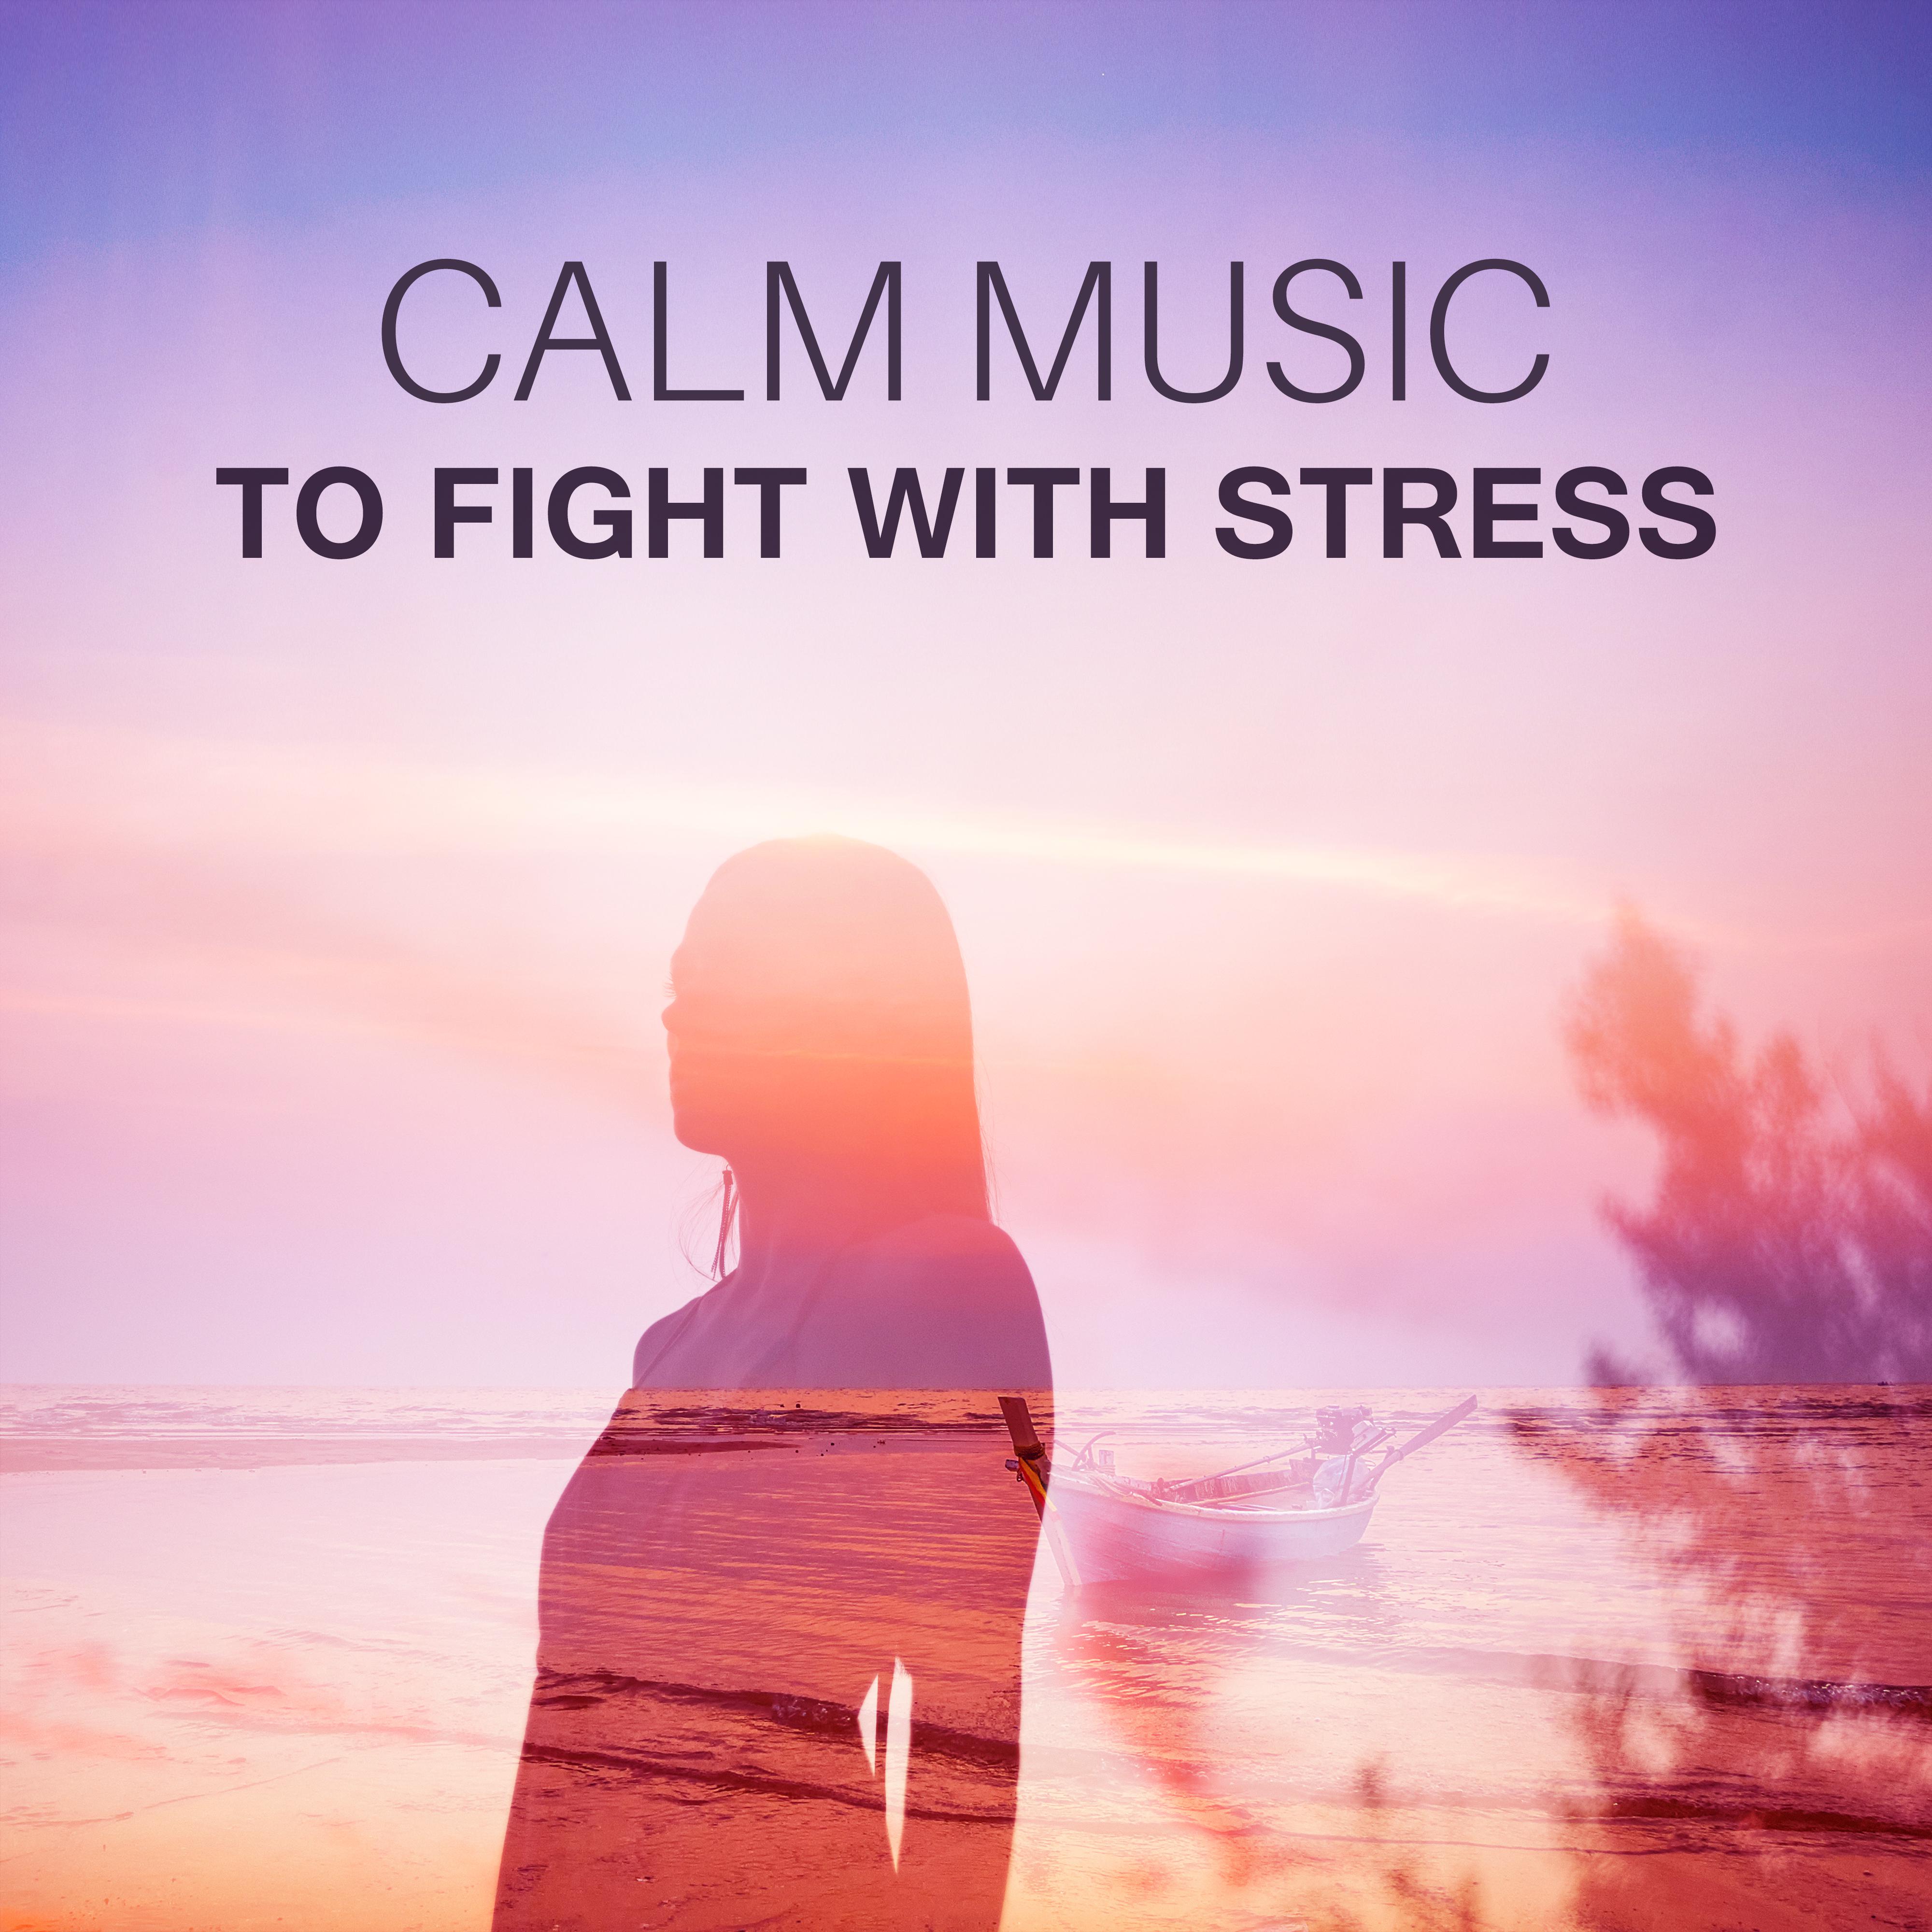 Calm Music to Fight with Stress  Calm Down  Relax, New Age Music, No More Stress, Inner Calmness